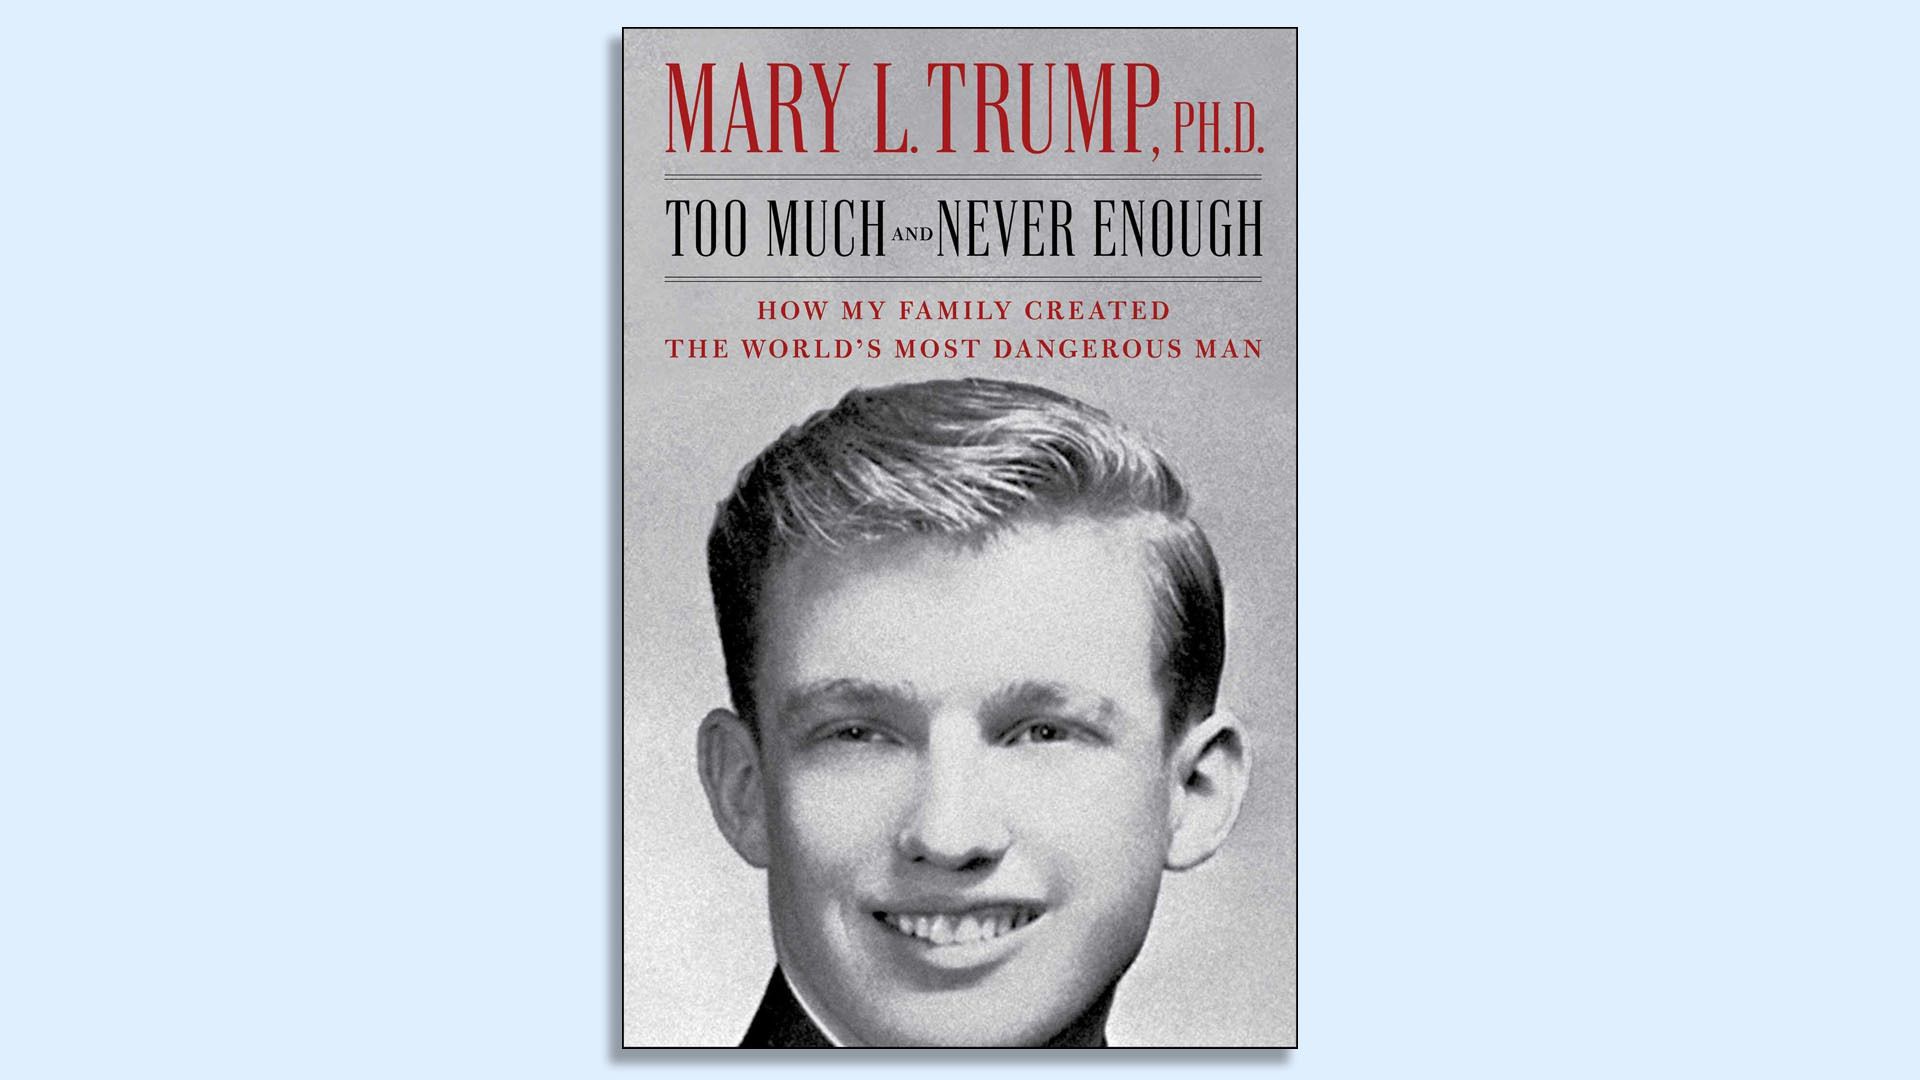 Cover of Mary Trump's book about Donald Trump